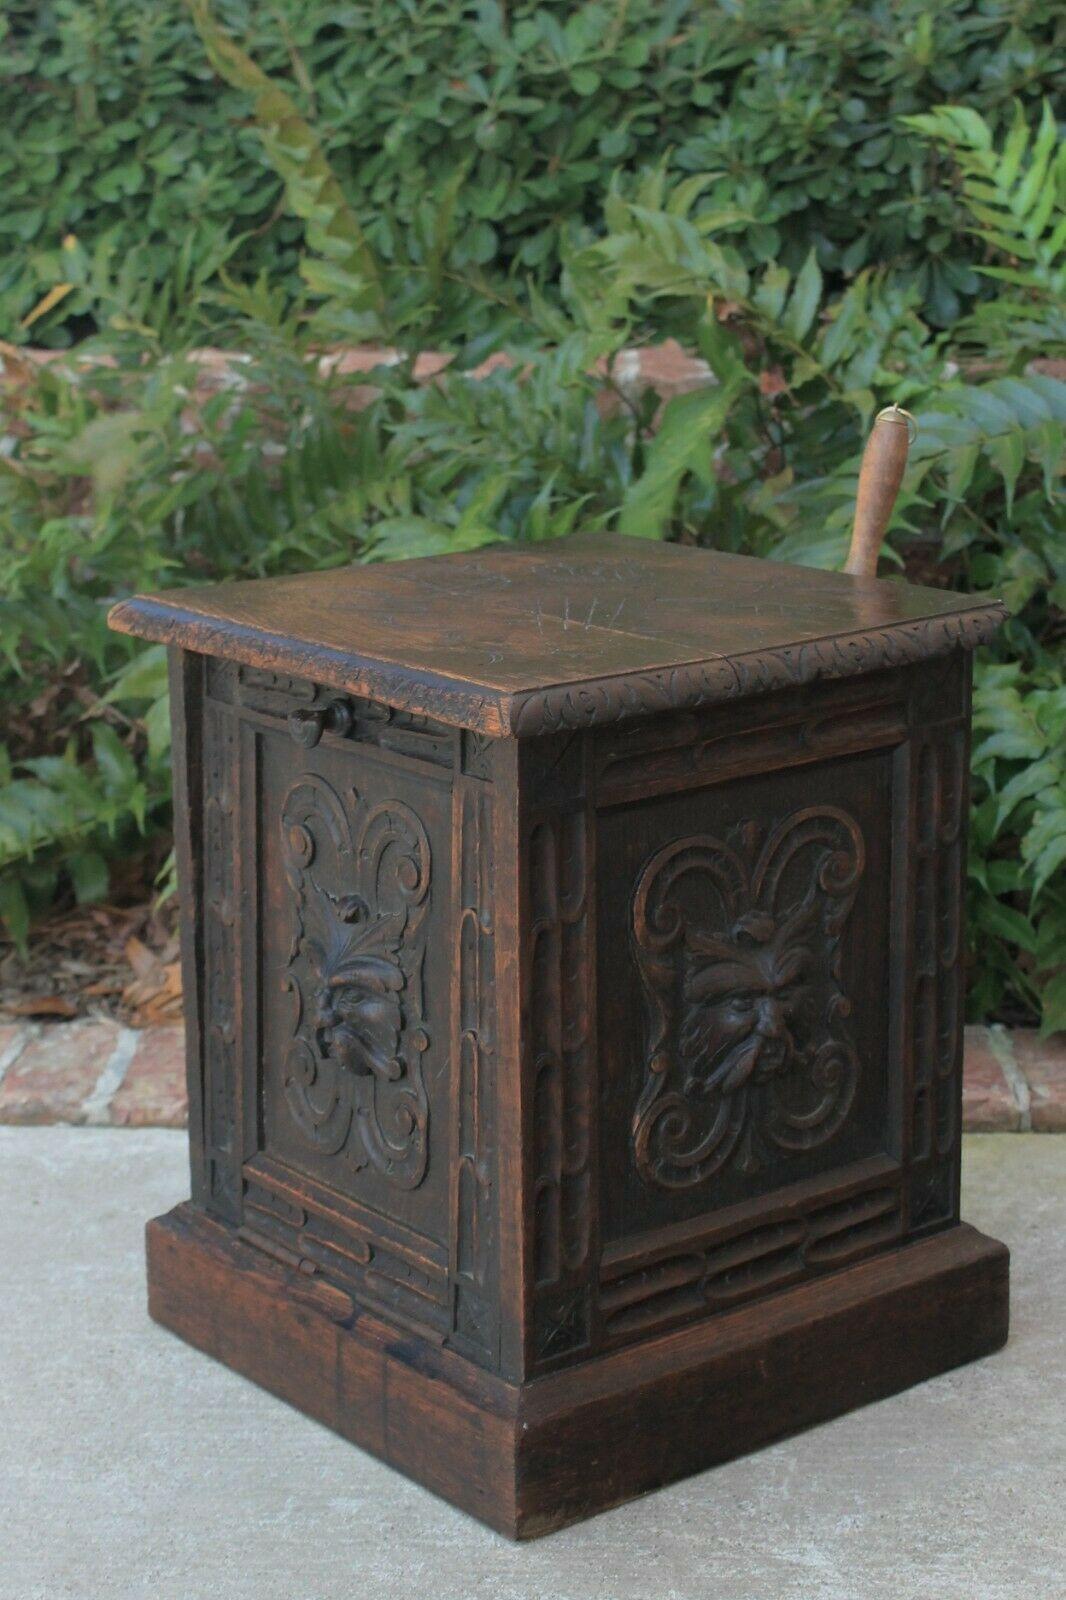 Antique English Coal Hod Scuttle Hearth Fireplace End Table Carved Oak 4